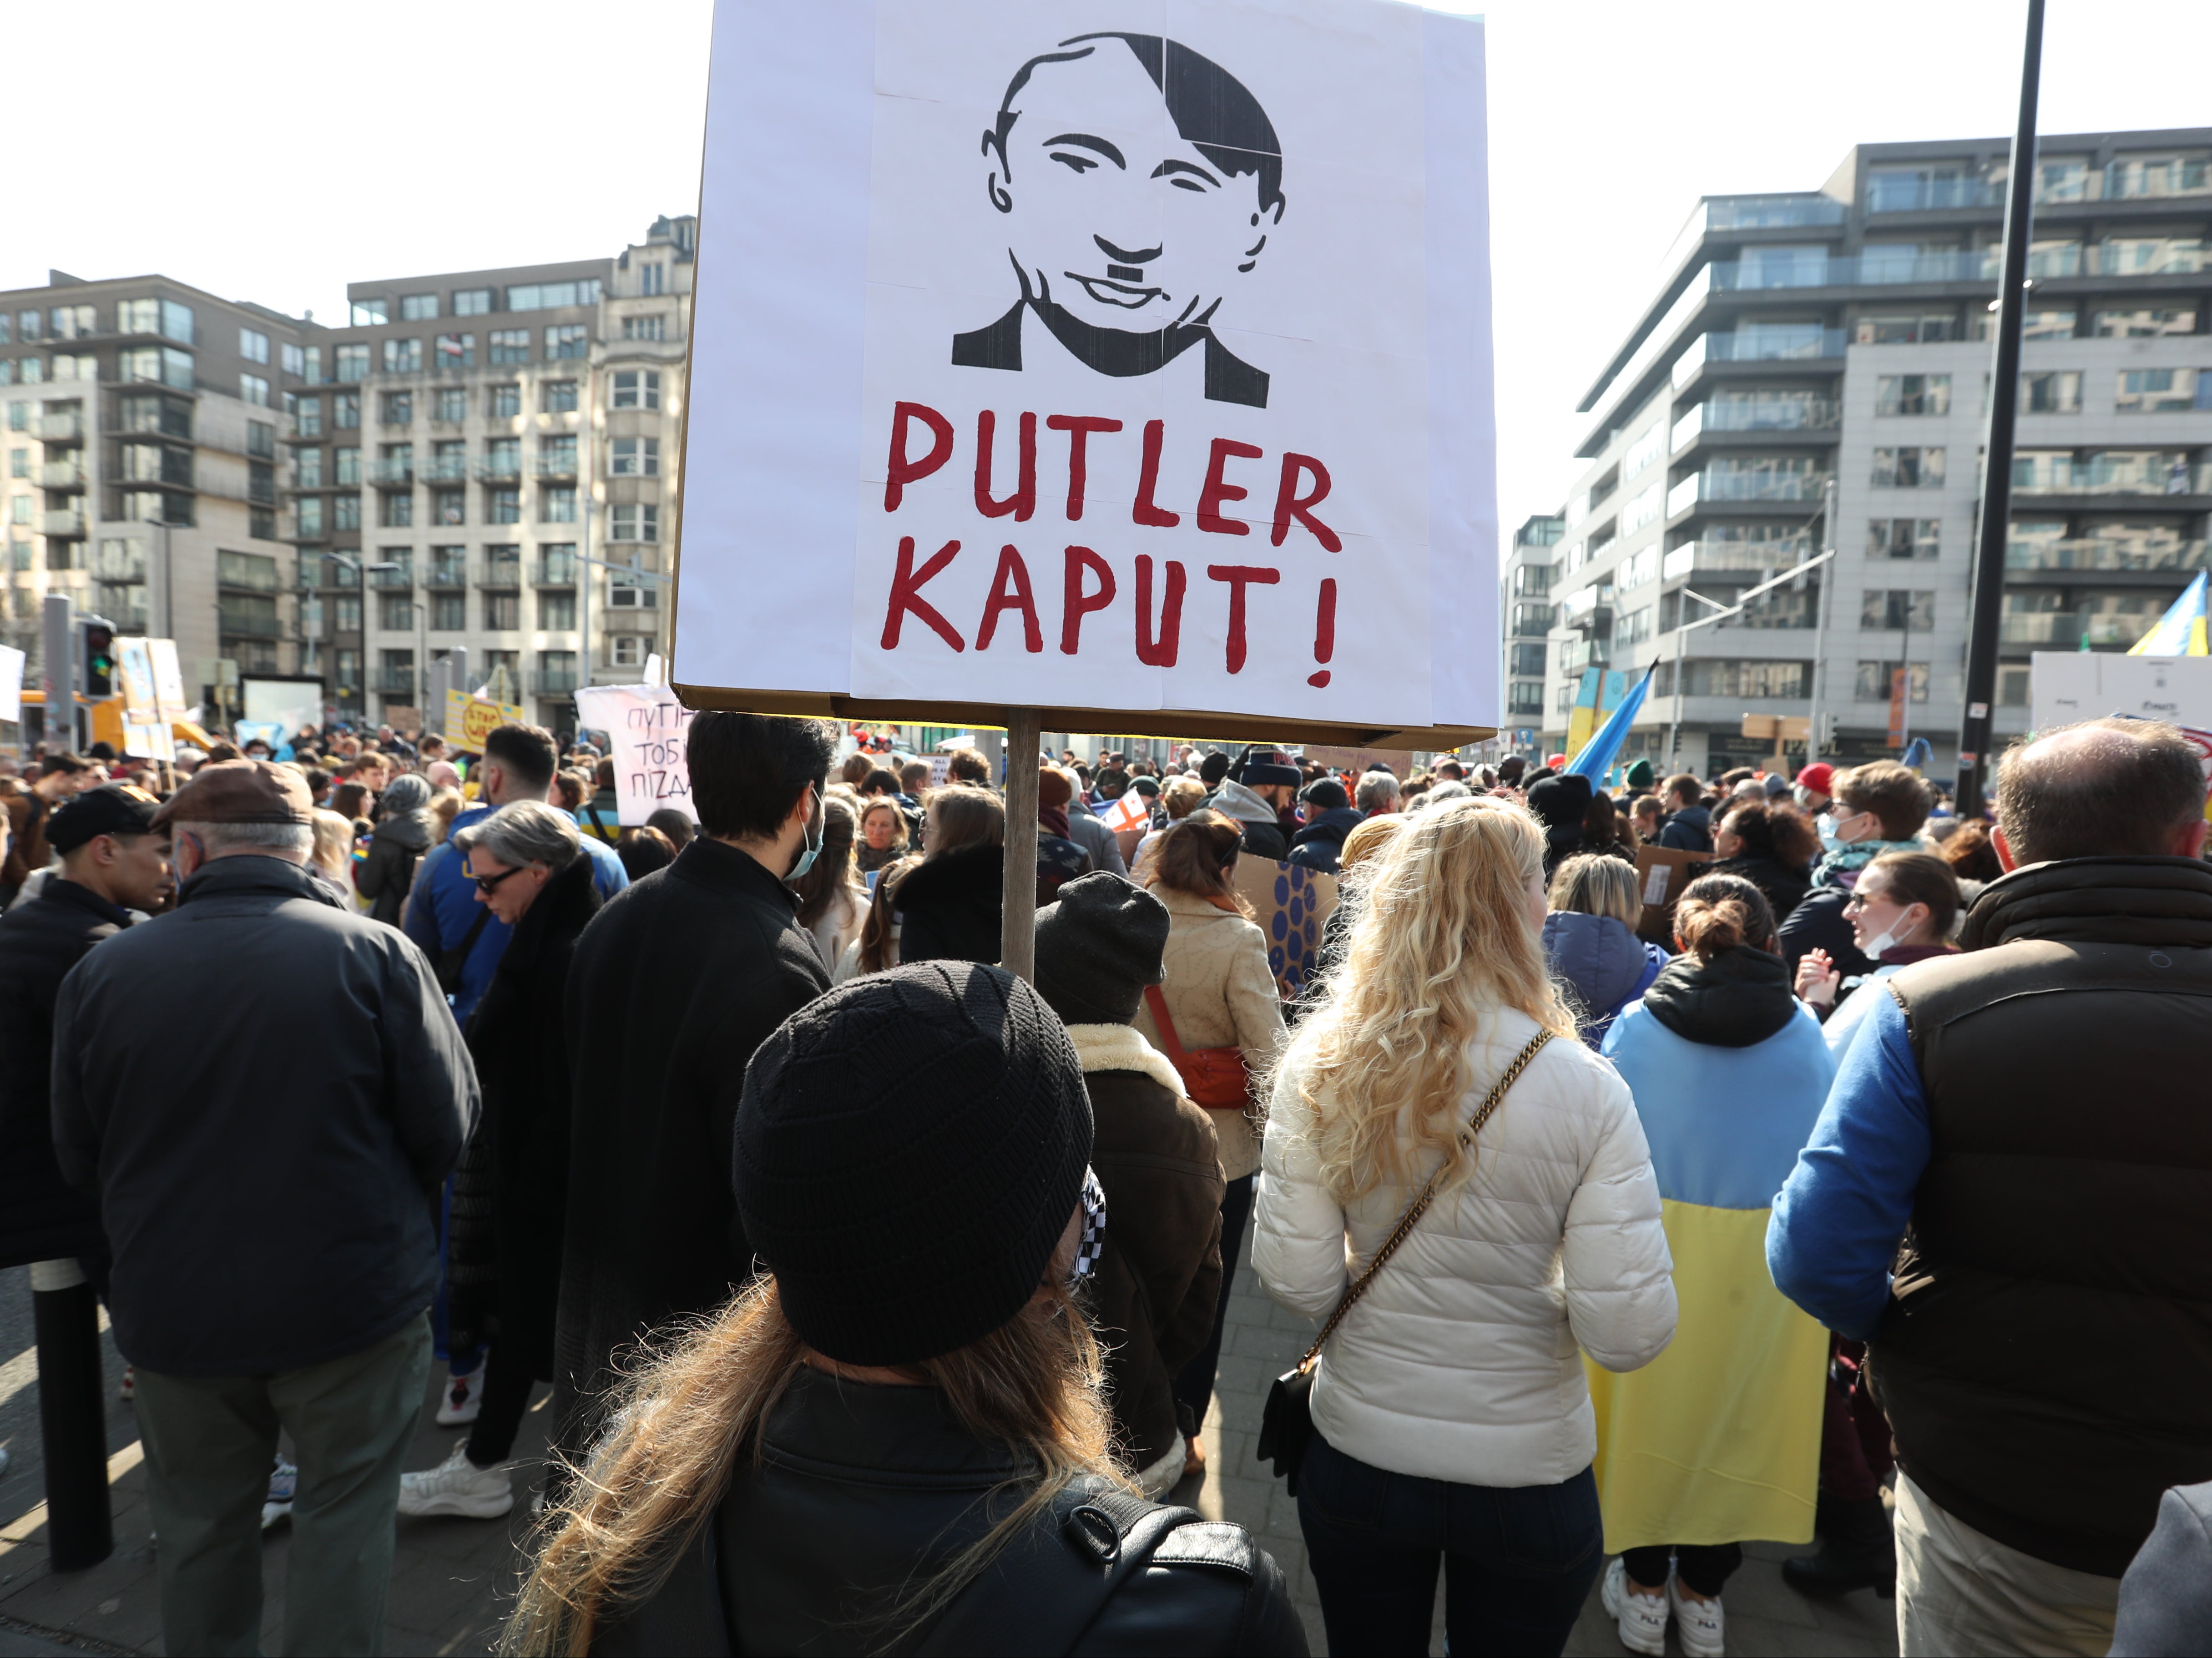 A protester in Brussels carries a sign that shows a mash-up portrait of Putin and Hitler